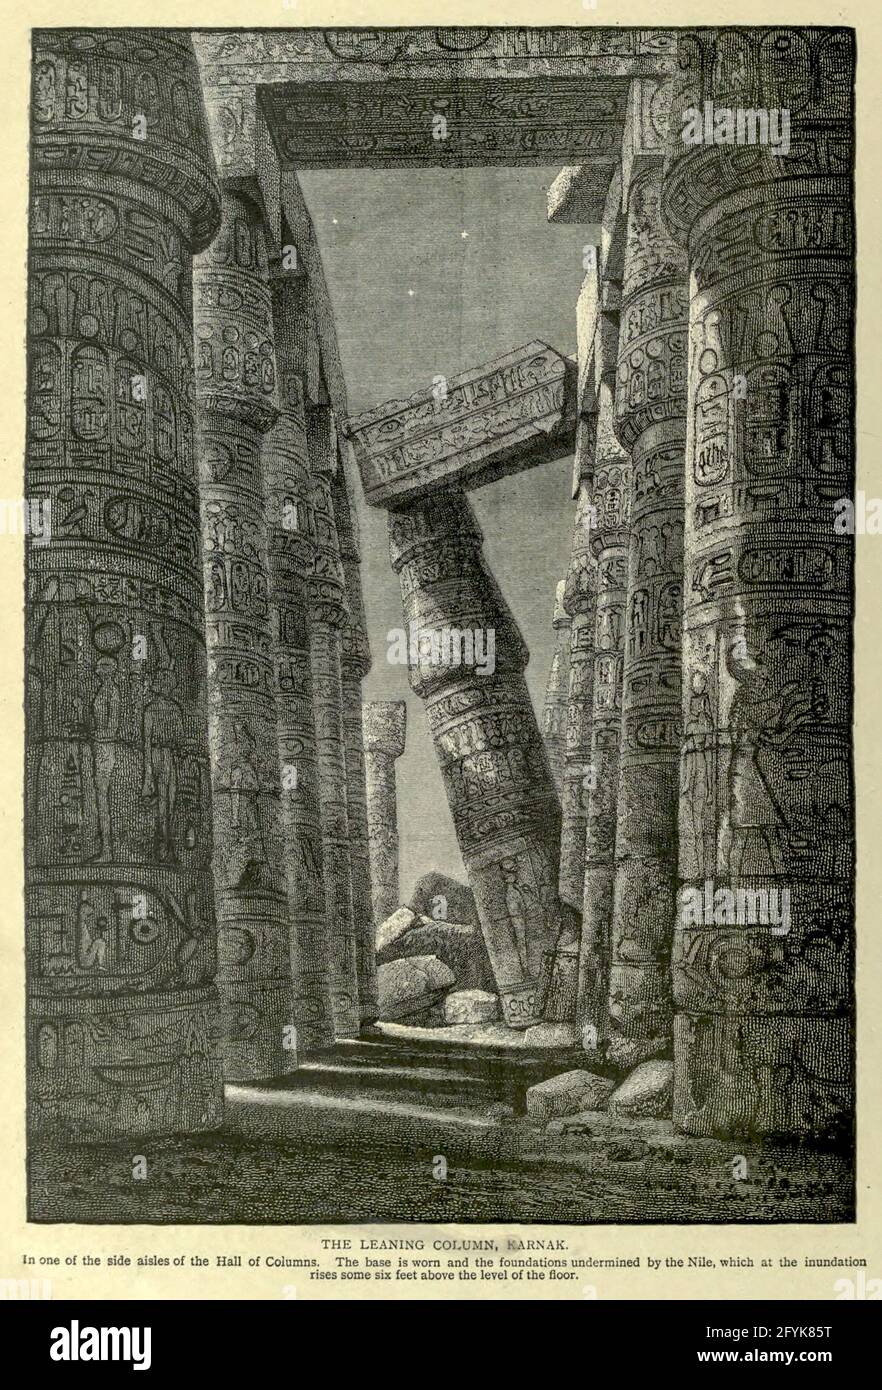 THE LEANING COLUMN, KARNAK. In one of the side aisles of the Hall of Columns. The base is worn and the foundations undermined by the Nile, which at the inundation rises some six feet above the level of the floor. Wood engraving from 'Picturesque Palestine, Sinai and Egypt' by Wilson, Charles William, Sir, 1836-1905; Lane-Poole, Stanley, 1854-1931 Volume 4. Published in 1884 by J. S. Virtue and Co, London Stock Photo